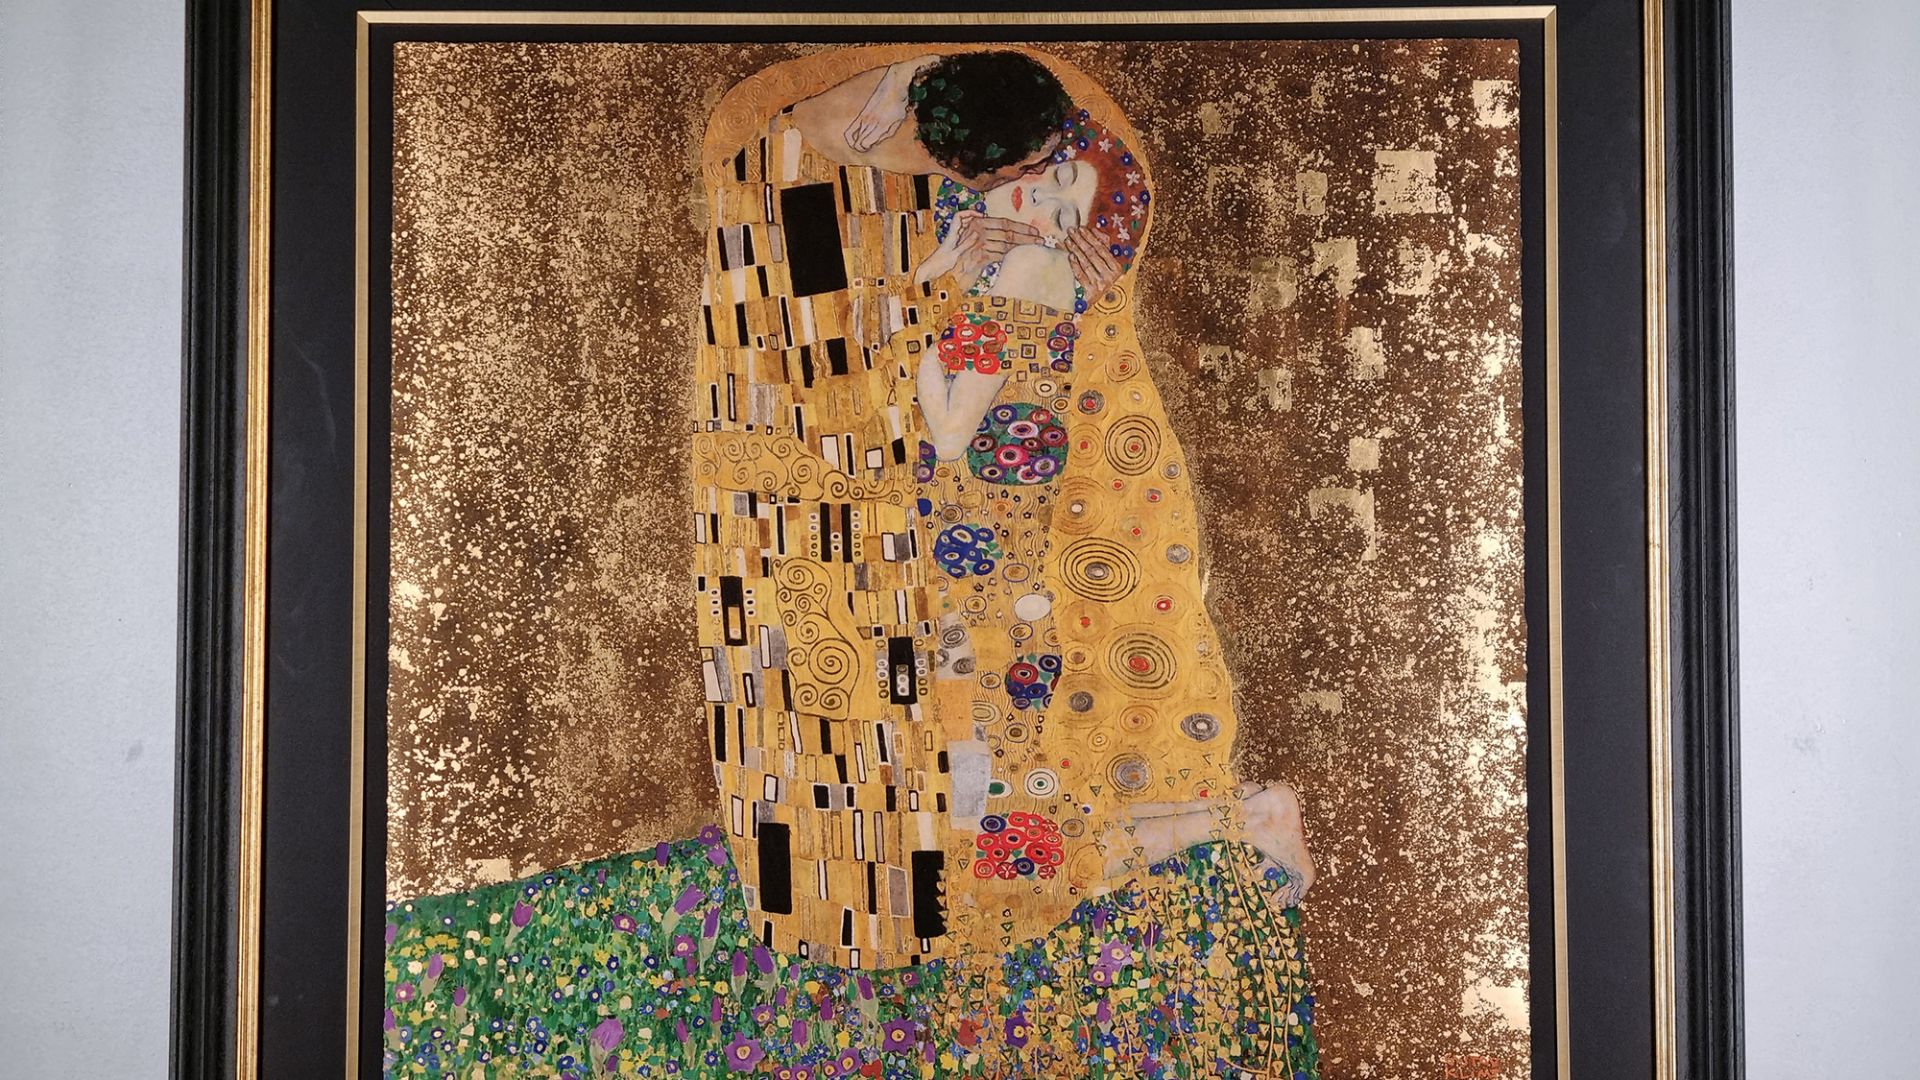 Outstanding 22 Carat Gold Gustav Klimt ""The Kiss"" Limited Edition. - Image 3 of 12